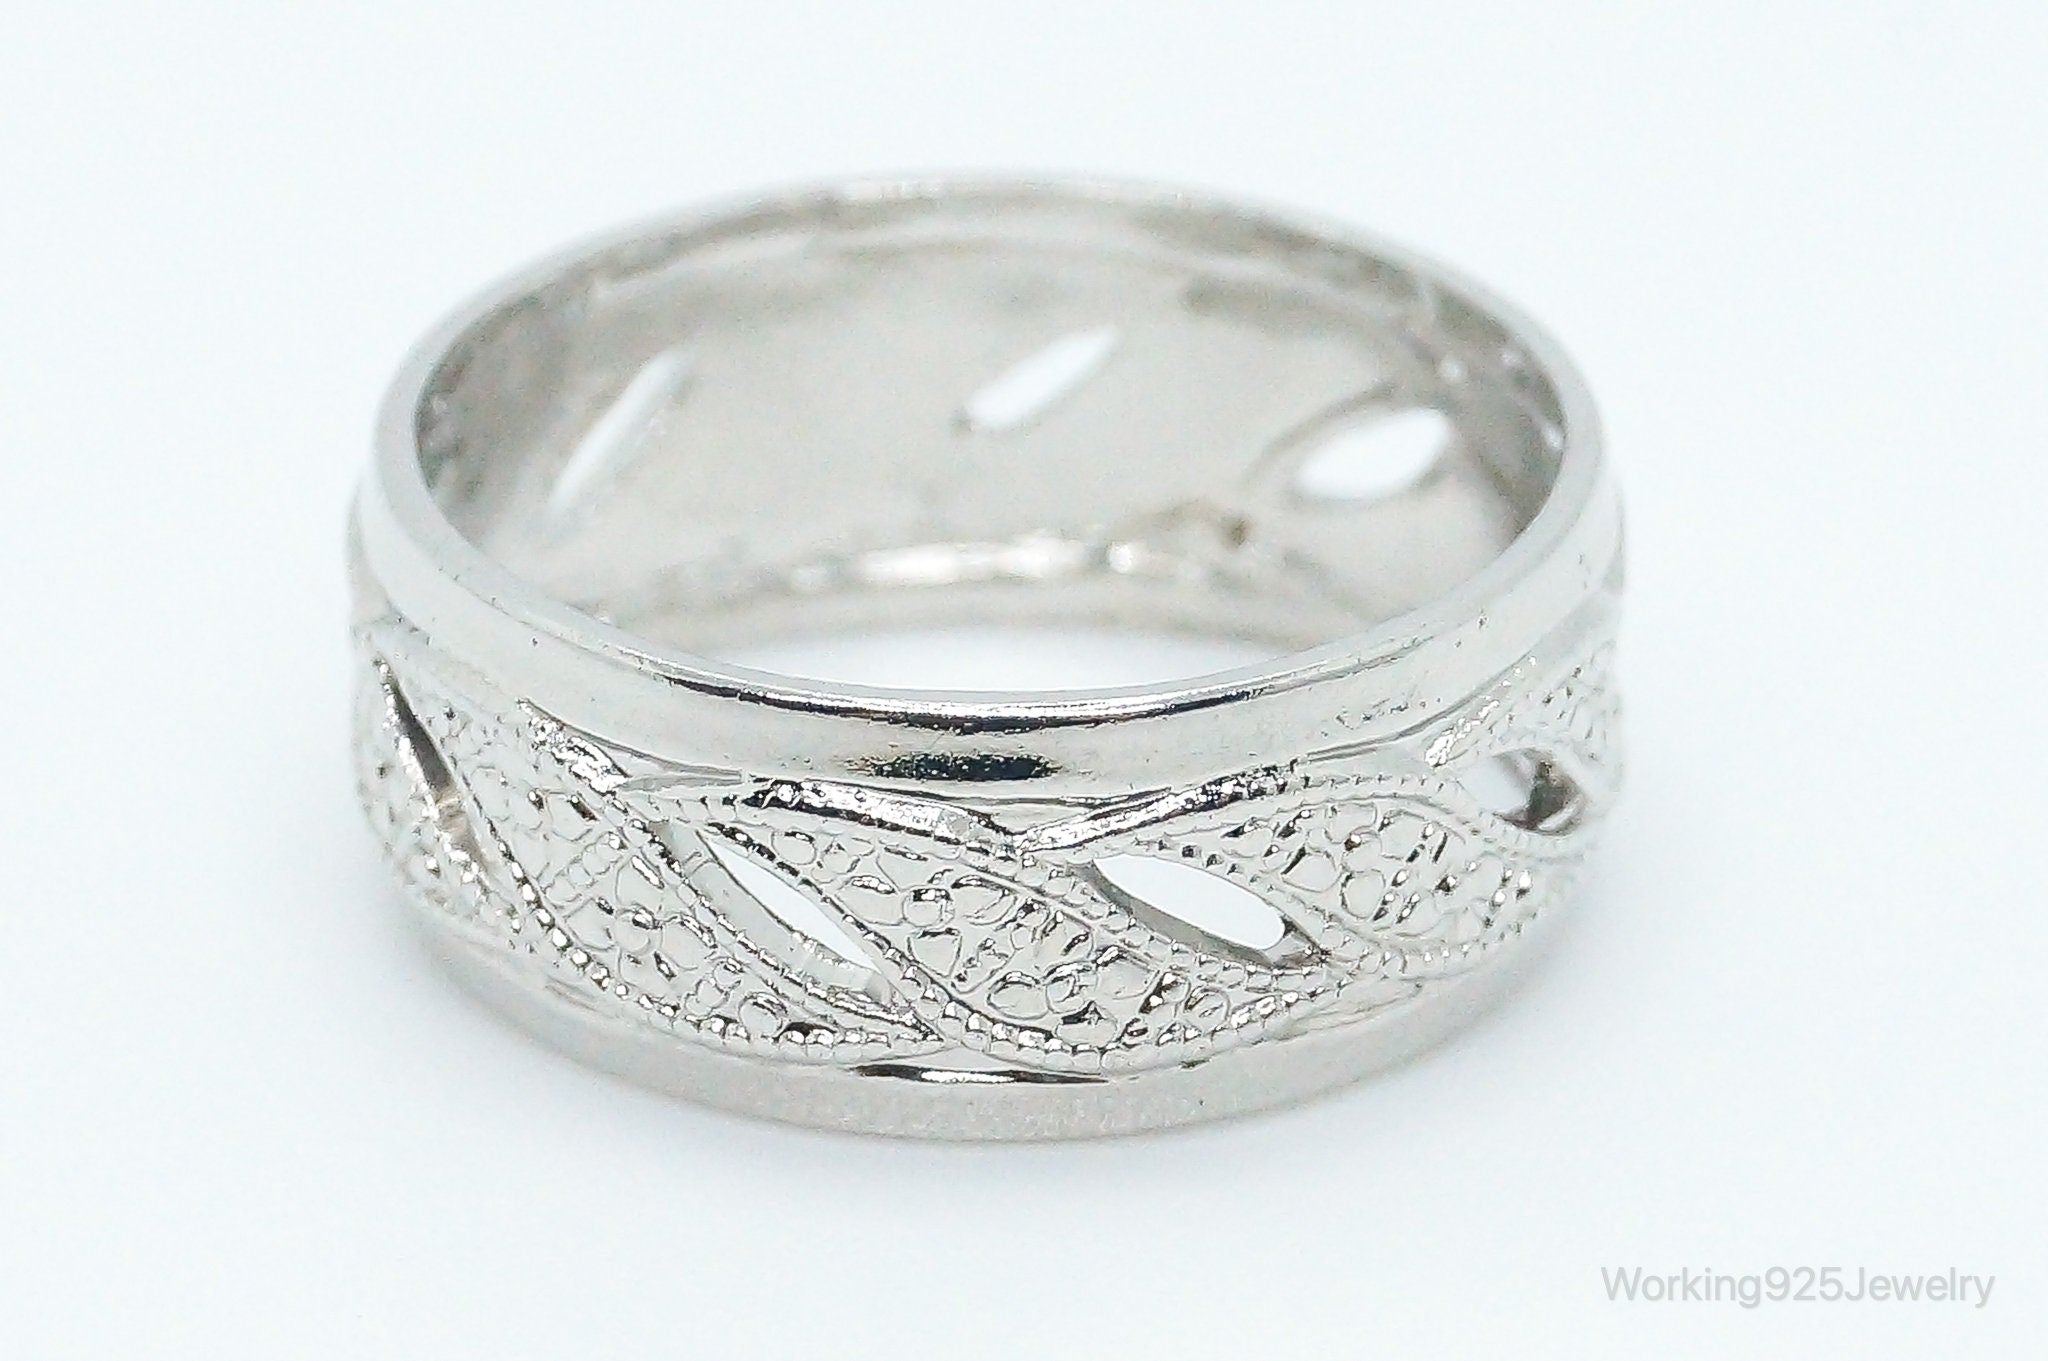 Antique Art Deco Sterling Silver Band Ring - Size 6.25